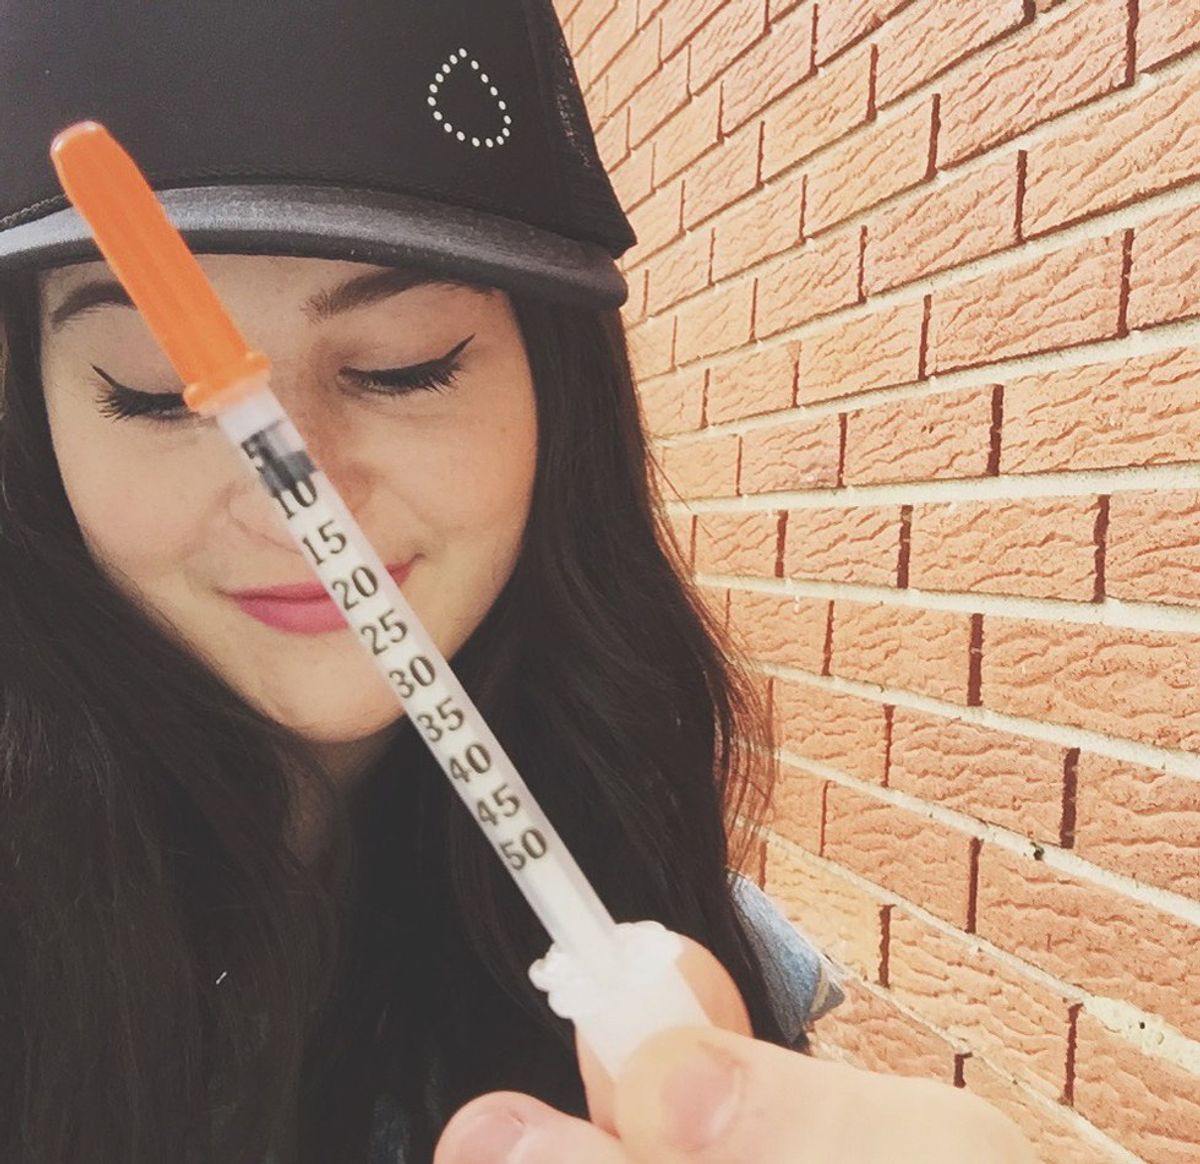 8 Things People With Type 1 Diabetes Want You To Know